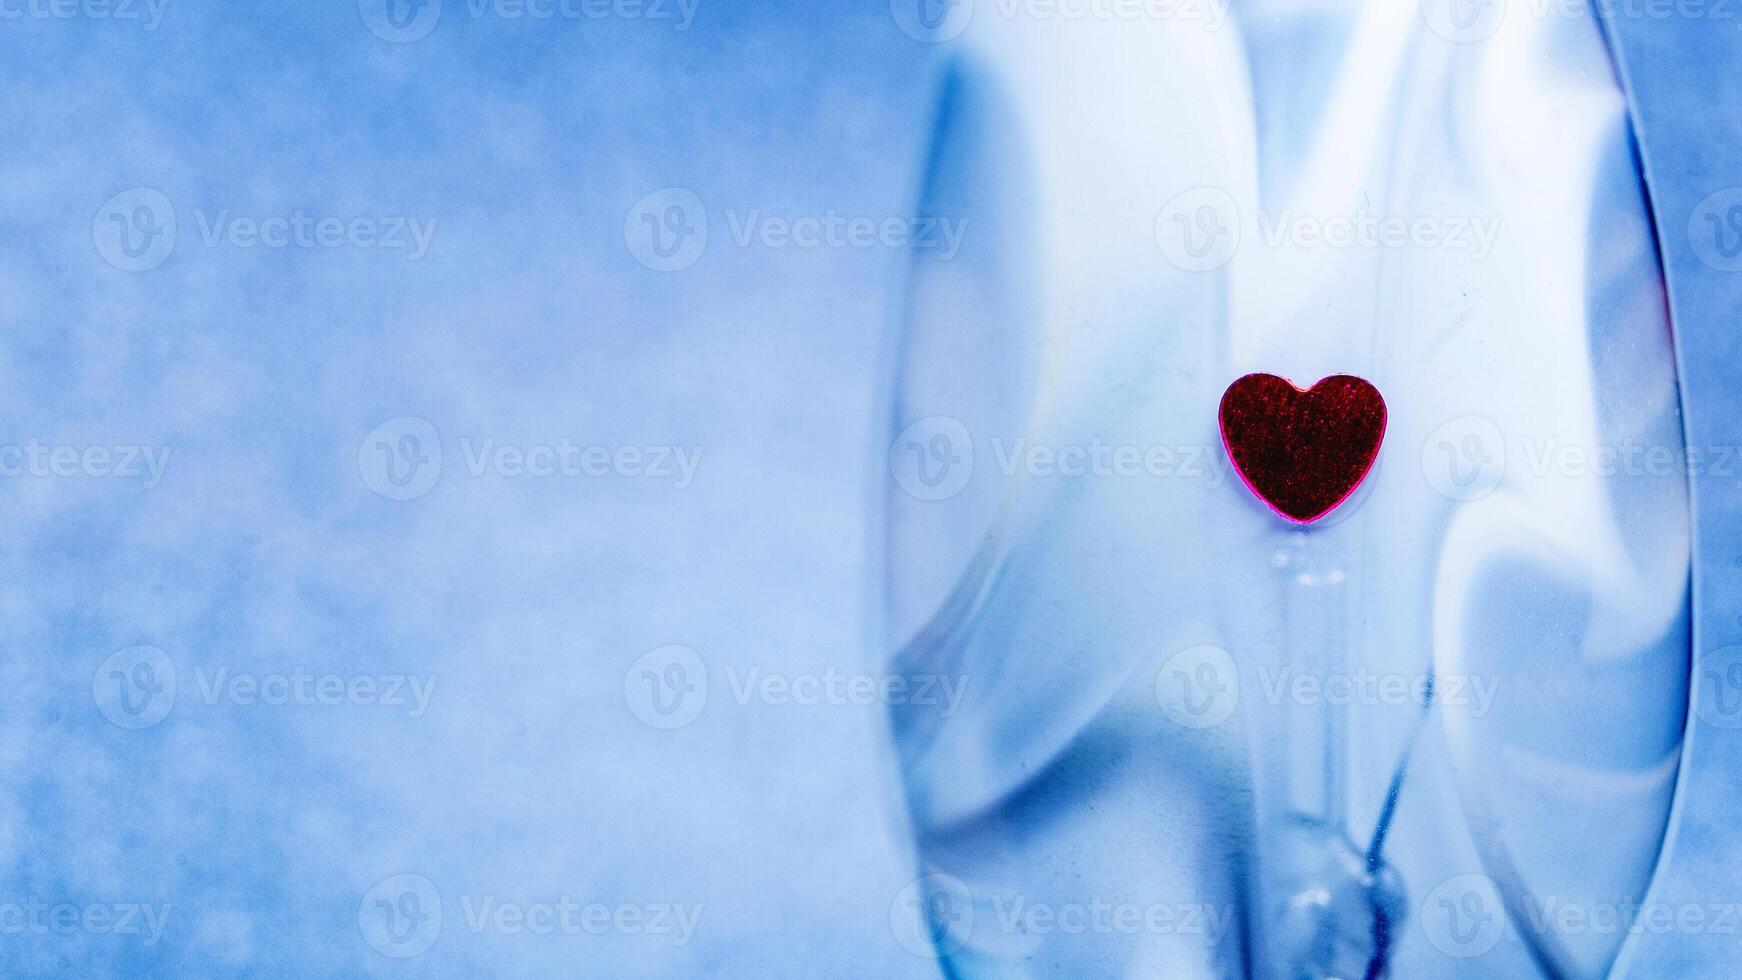 Plain blue background with little red heart photo